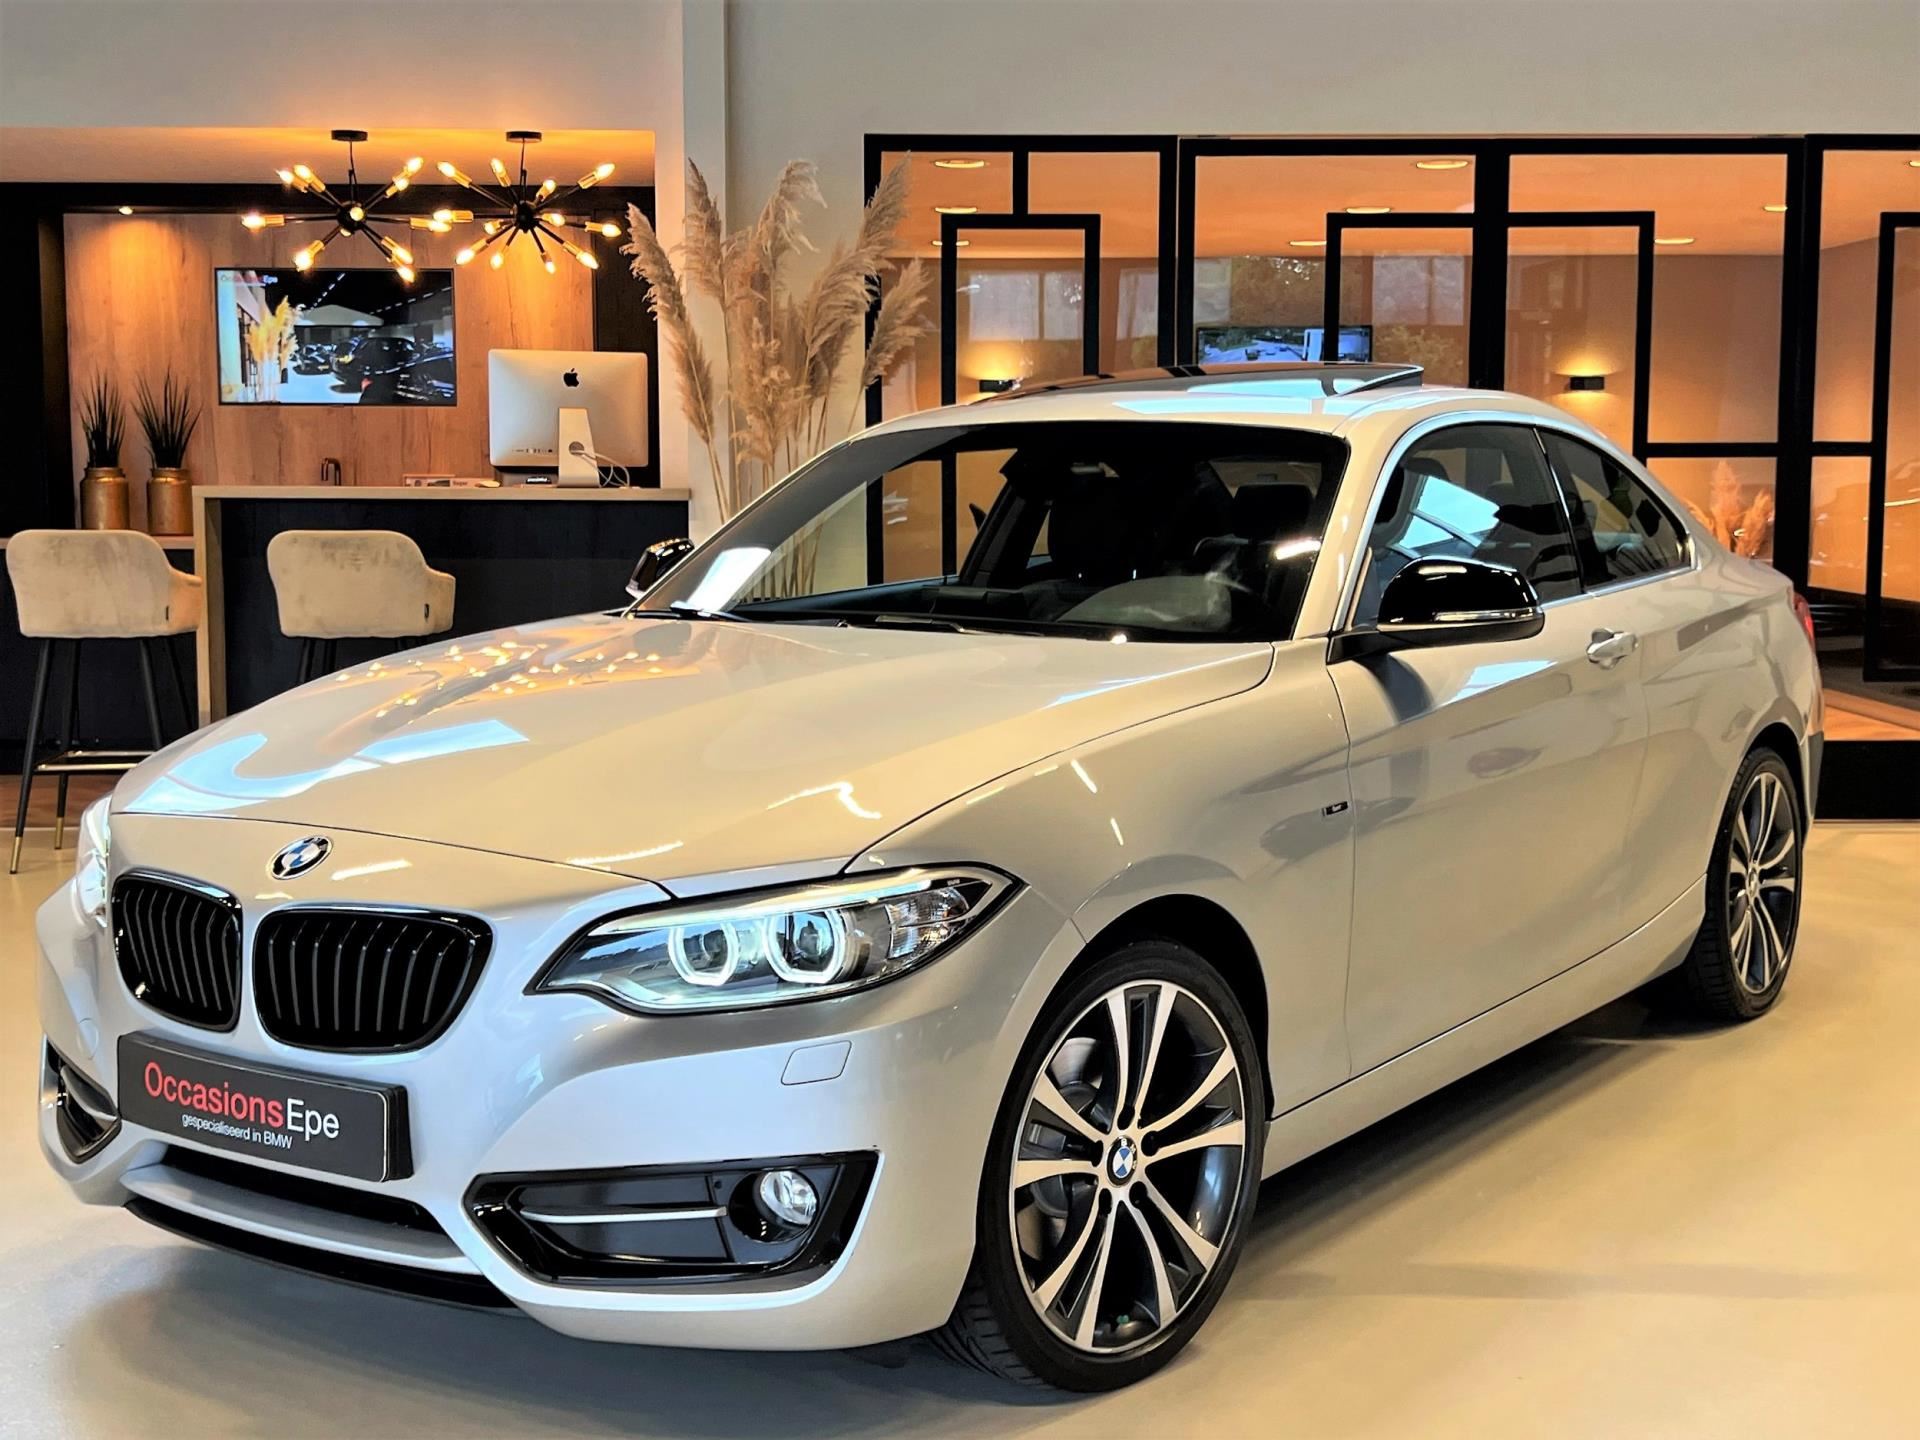 BMW 2-Serie Coupé occasion - Occasions Epe